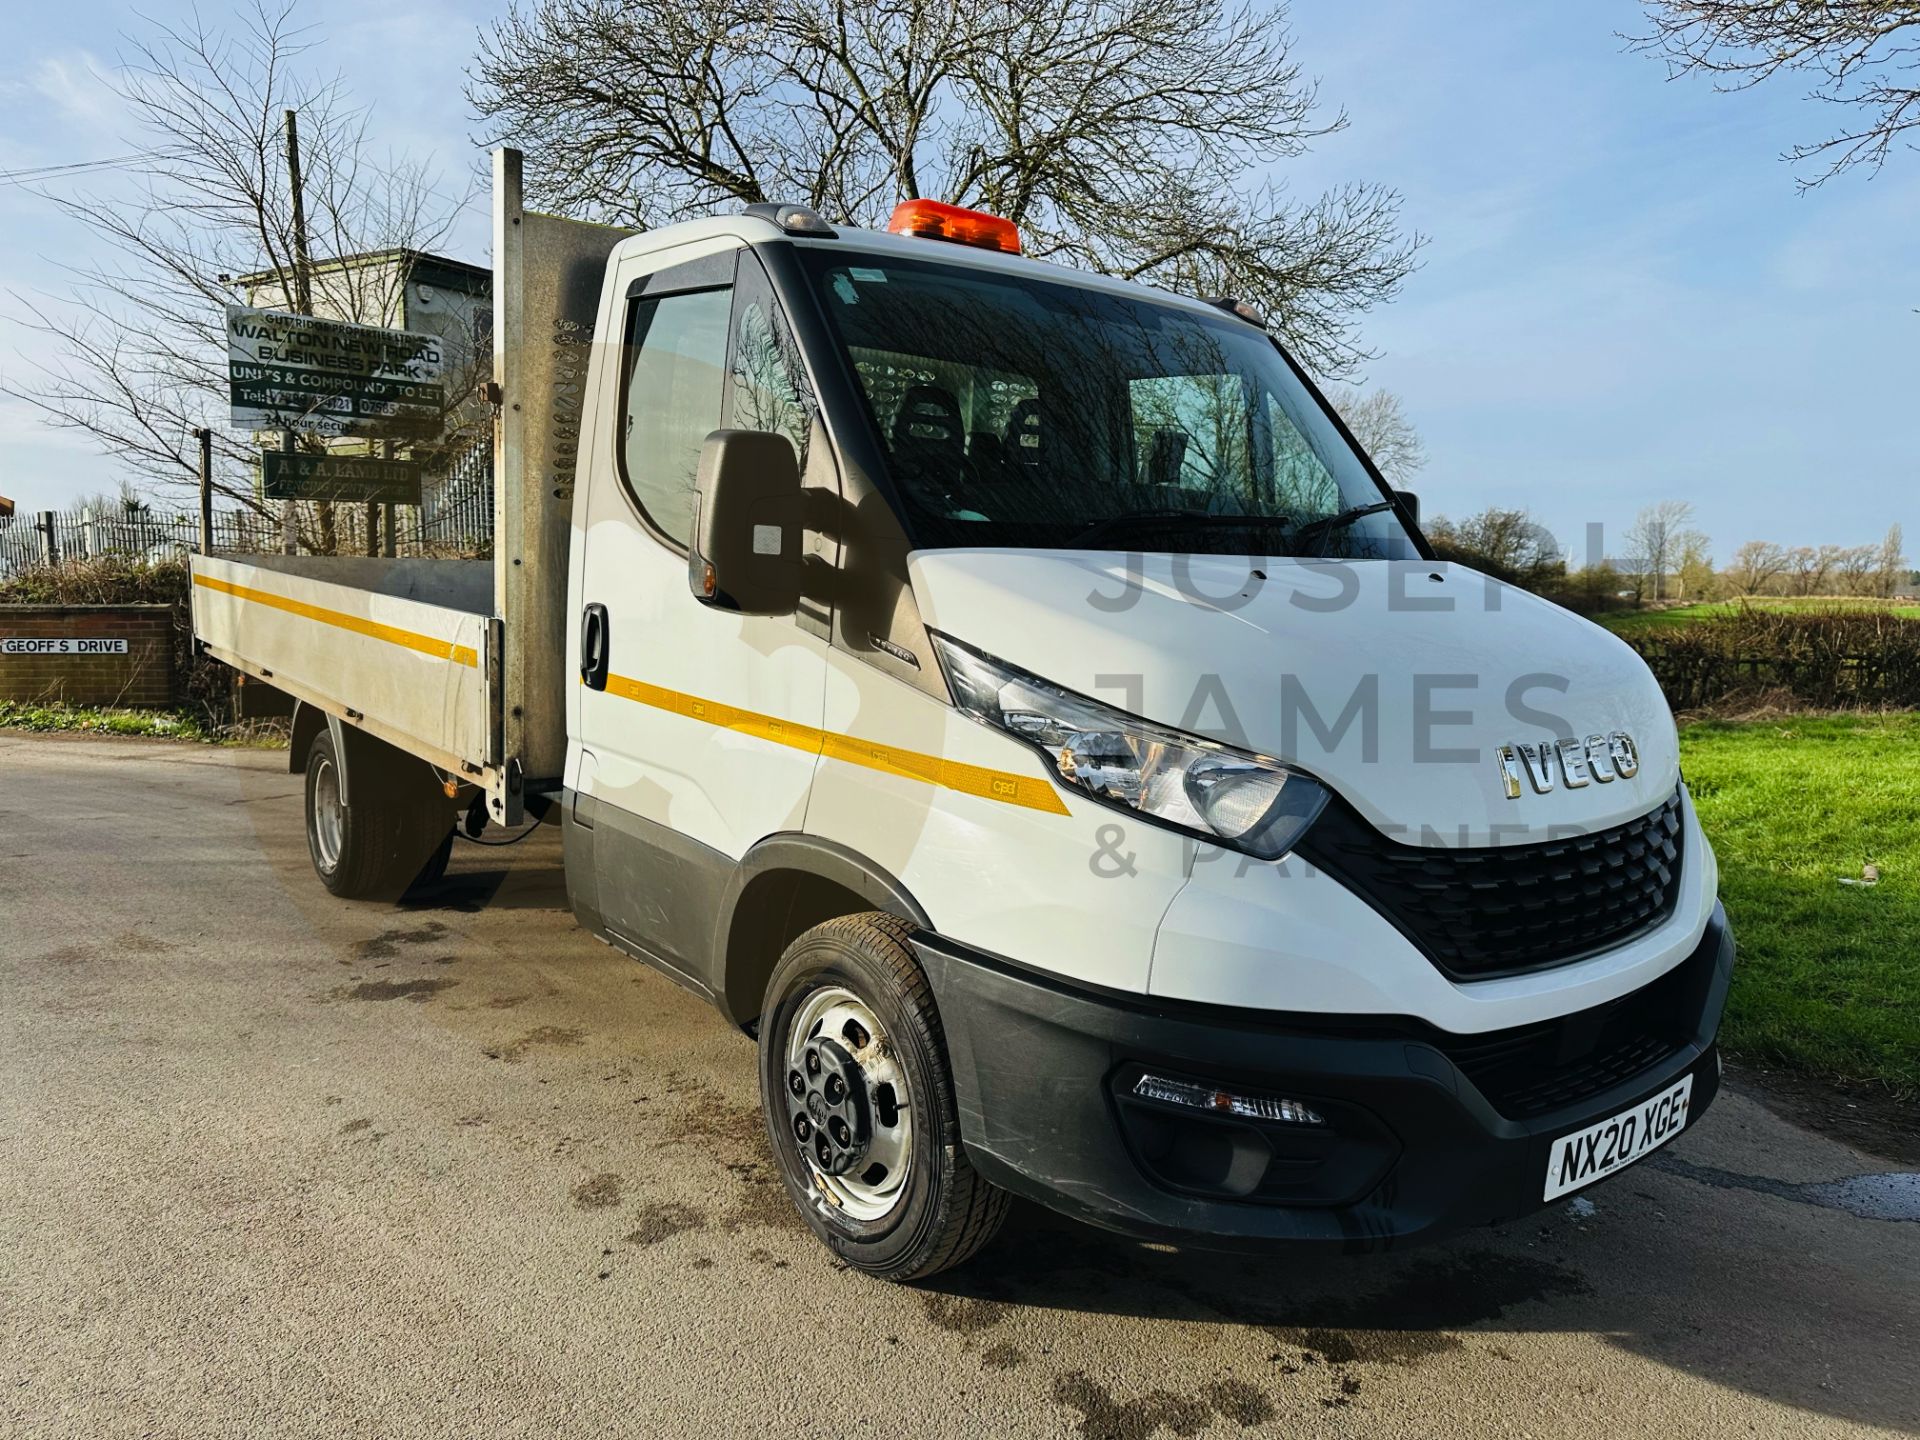 IVECO DAILY 35C14 (140) LWB DROPSIDE 3500KG TWIN WHEELER - 20 REG - 1 OWNER - LONG BODY - SCAFFOLD ? - Image 2 of 25